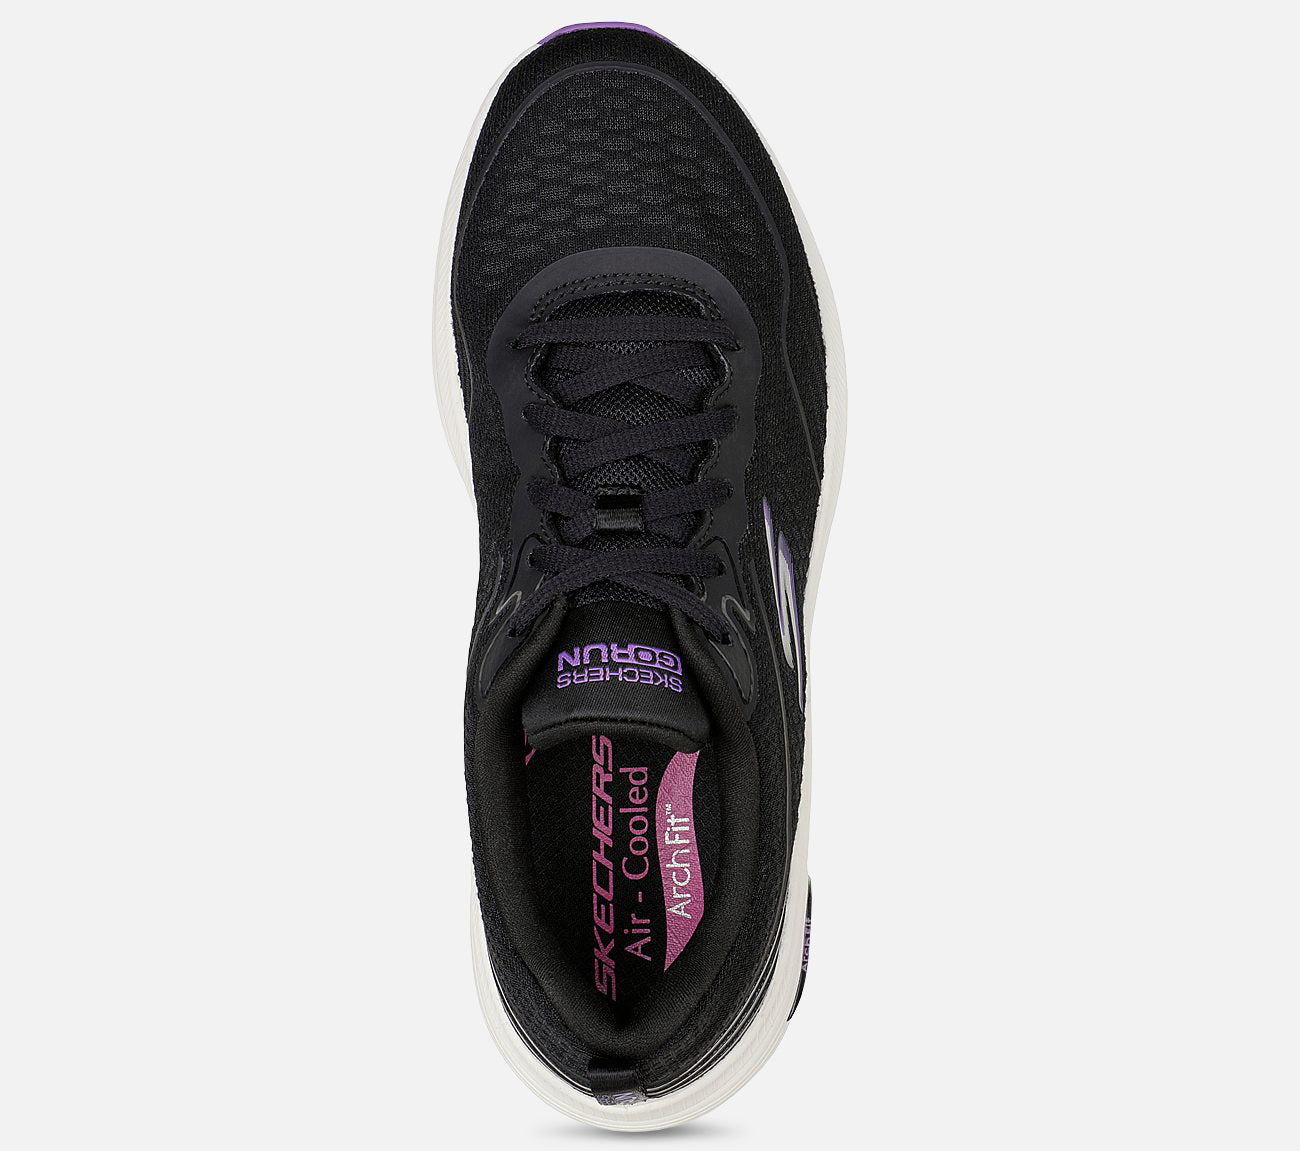 GO RUN Arch Fit - Smooth Flow Shoe Skechers